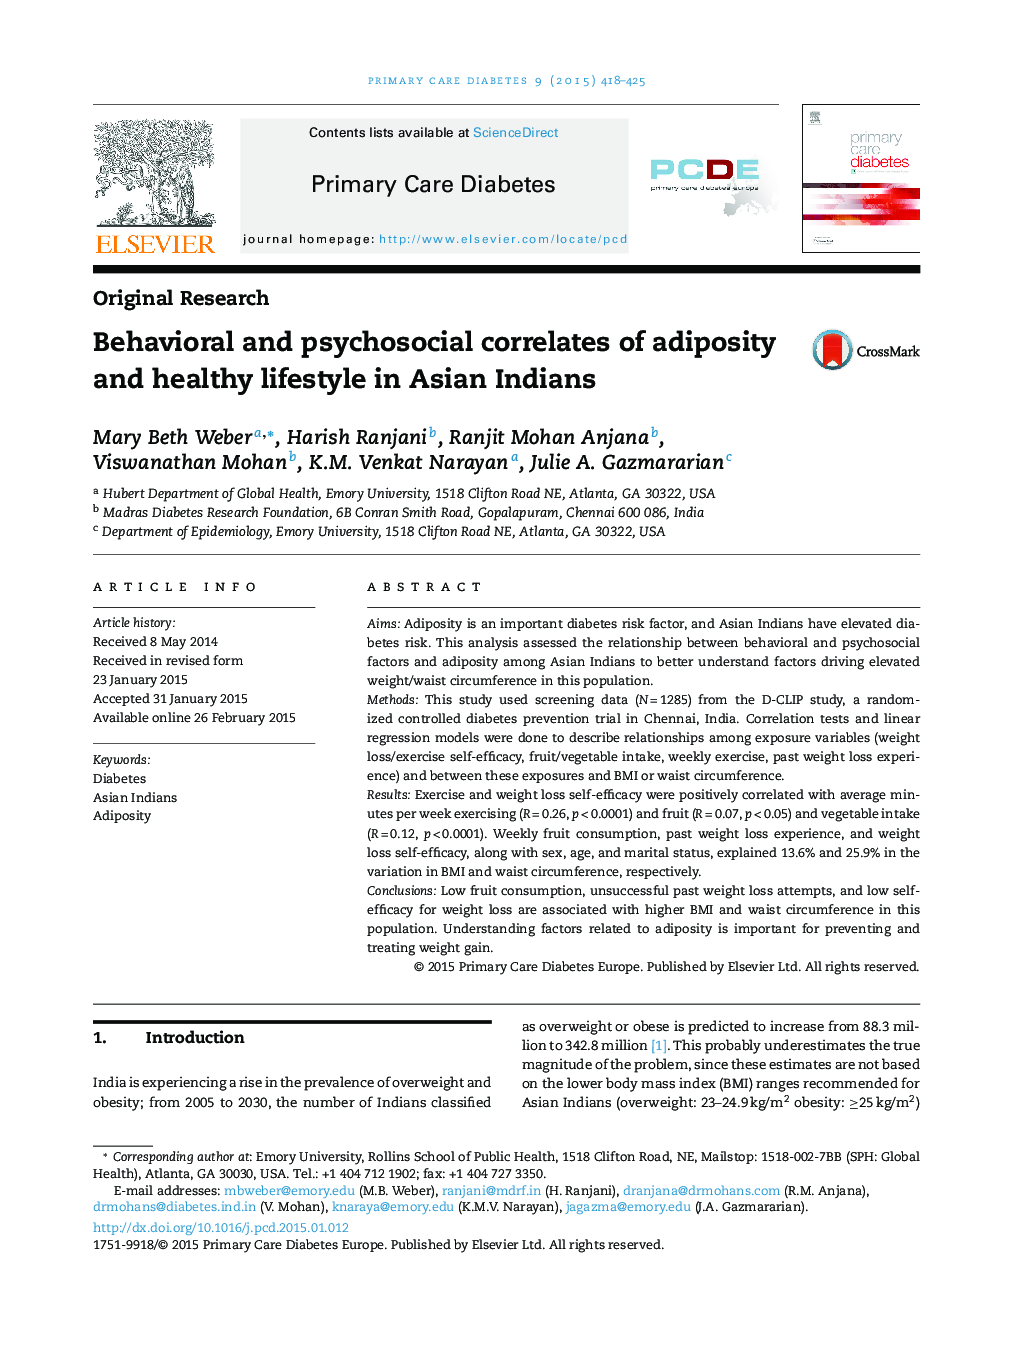 Behavioral and psychosocial correlates of adiposity and healthy lifestyle in Asian Indians